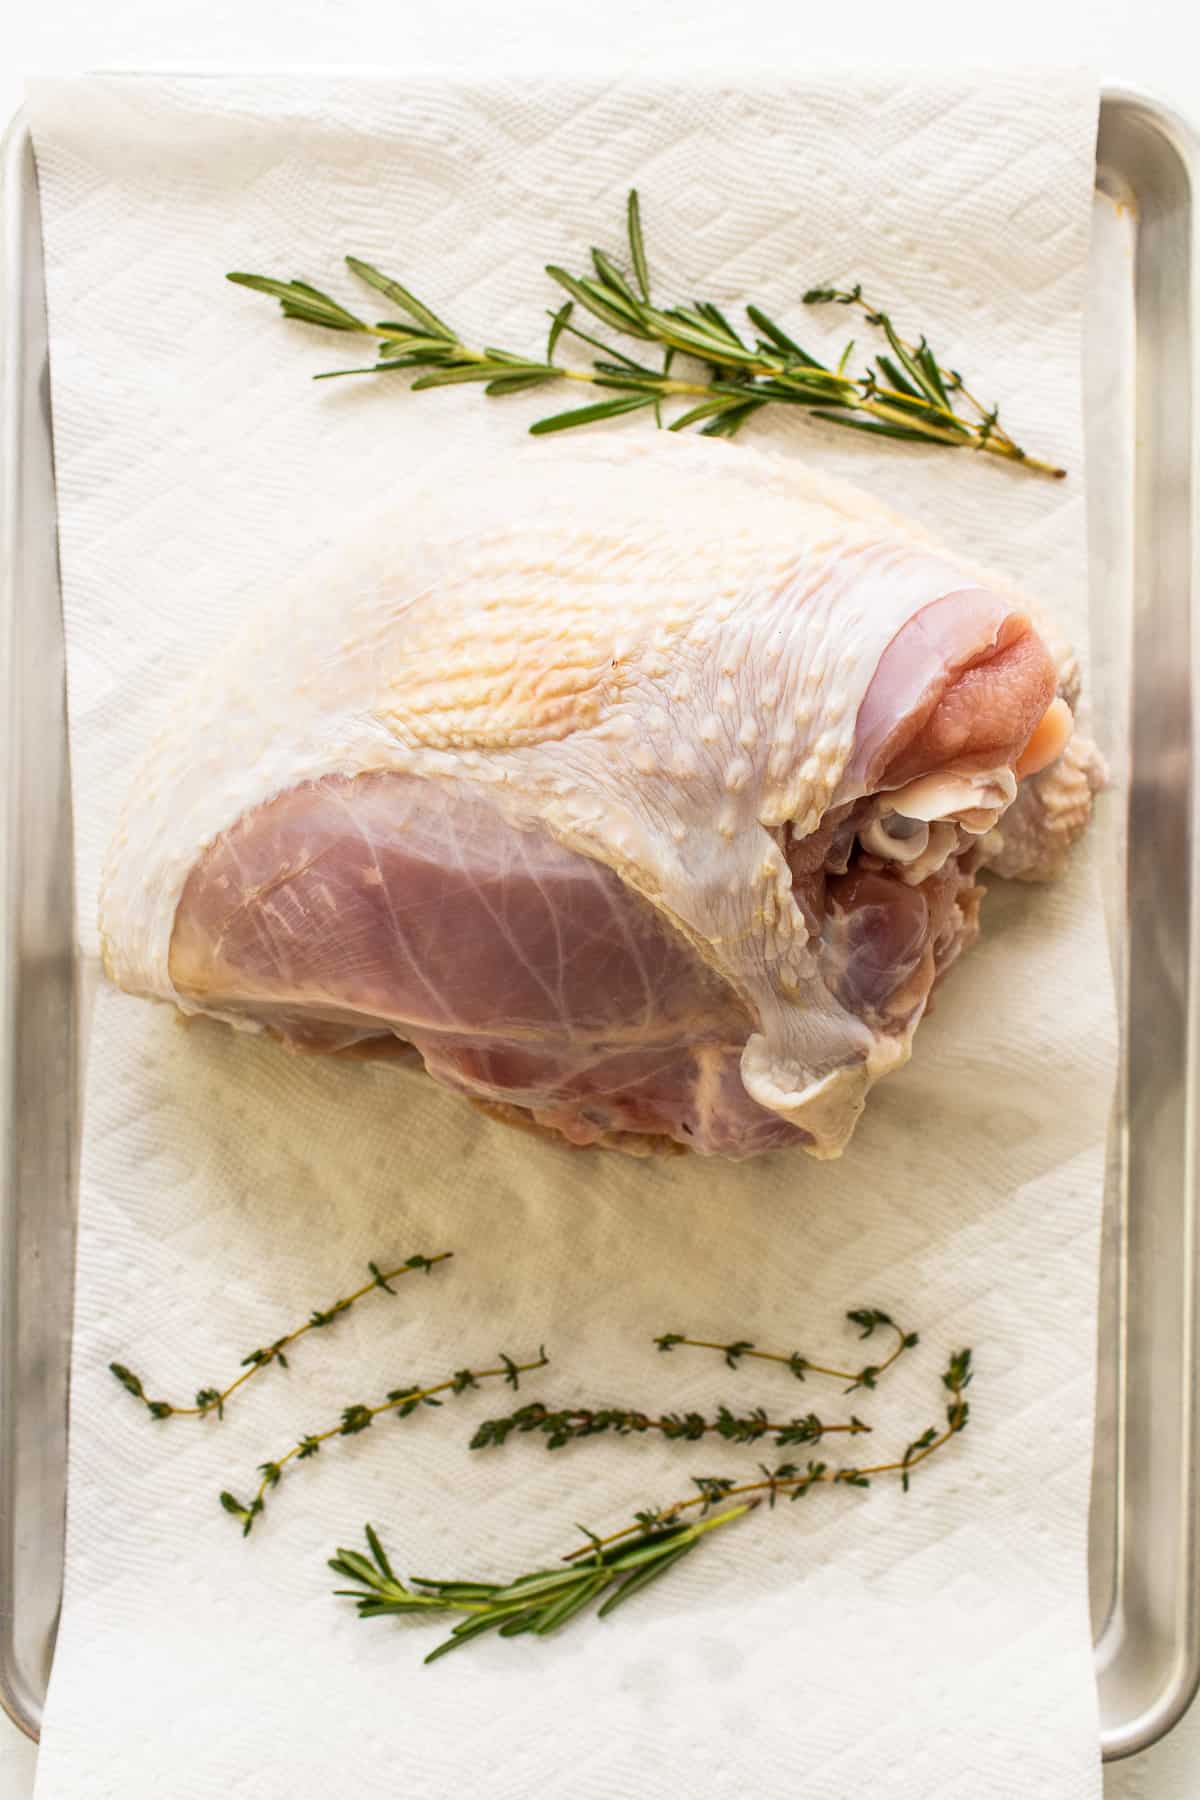 A turkey breast on a paper towel and fresh herbs. 